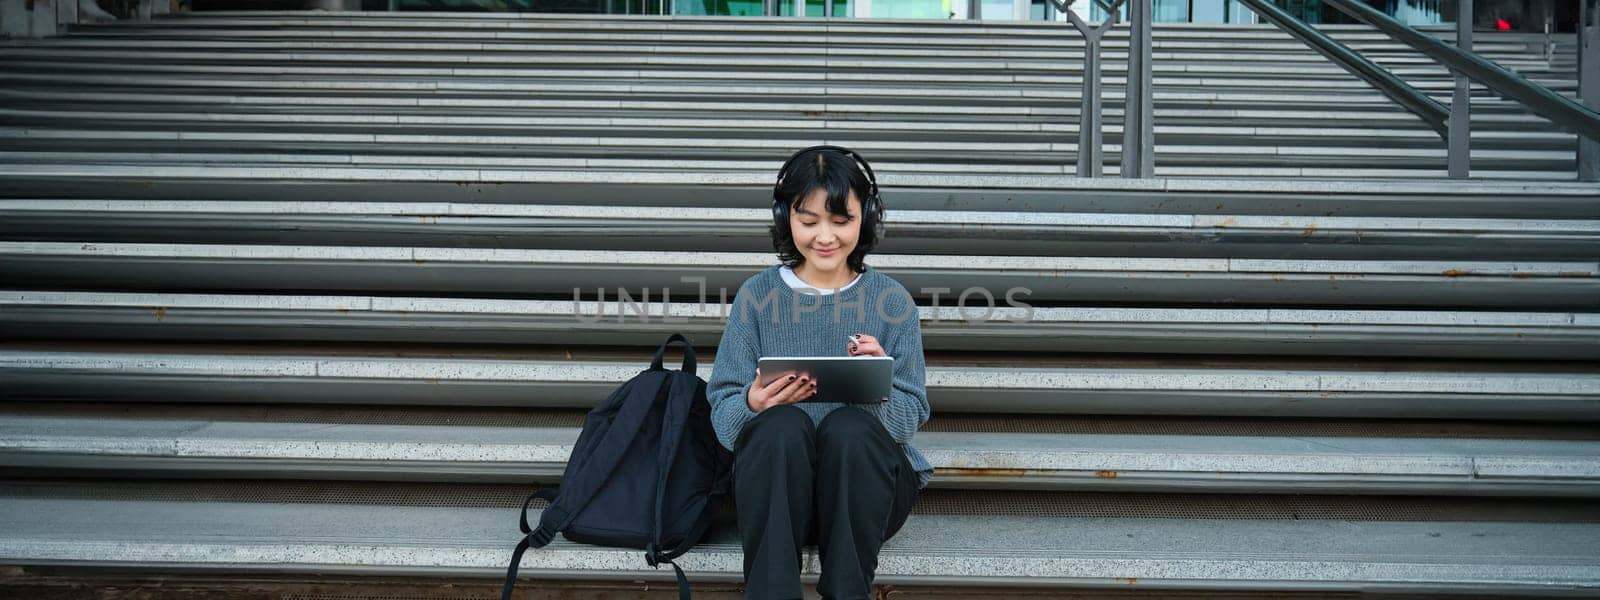 Young smiling digital artists works on her project using tablet and graphic pen, listens music in headphones and sits on stairs in public space, works on project.